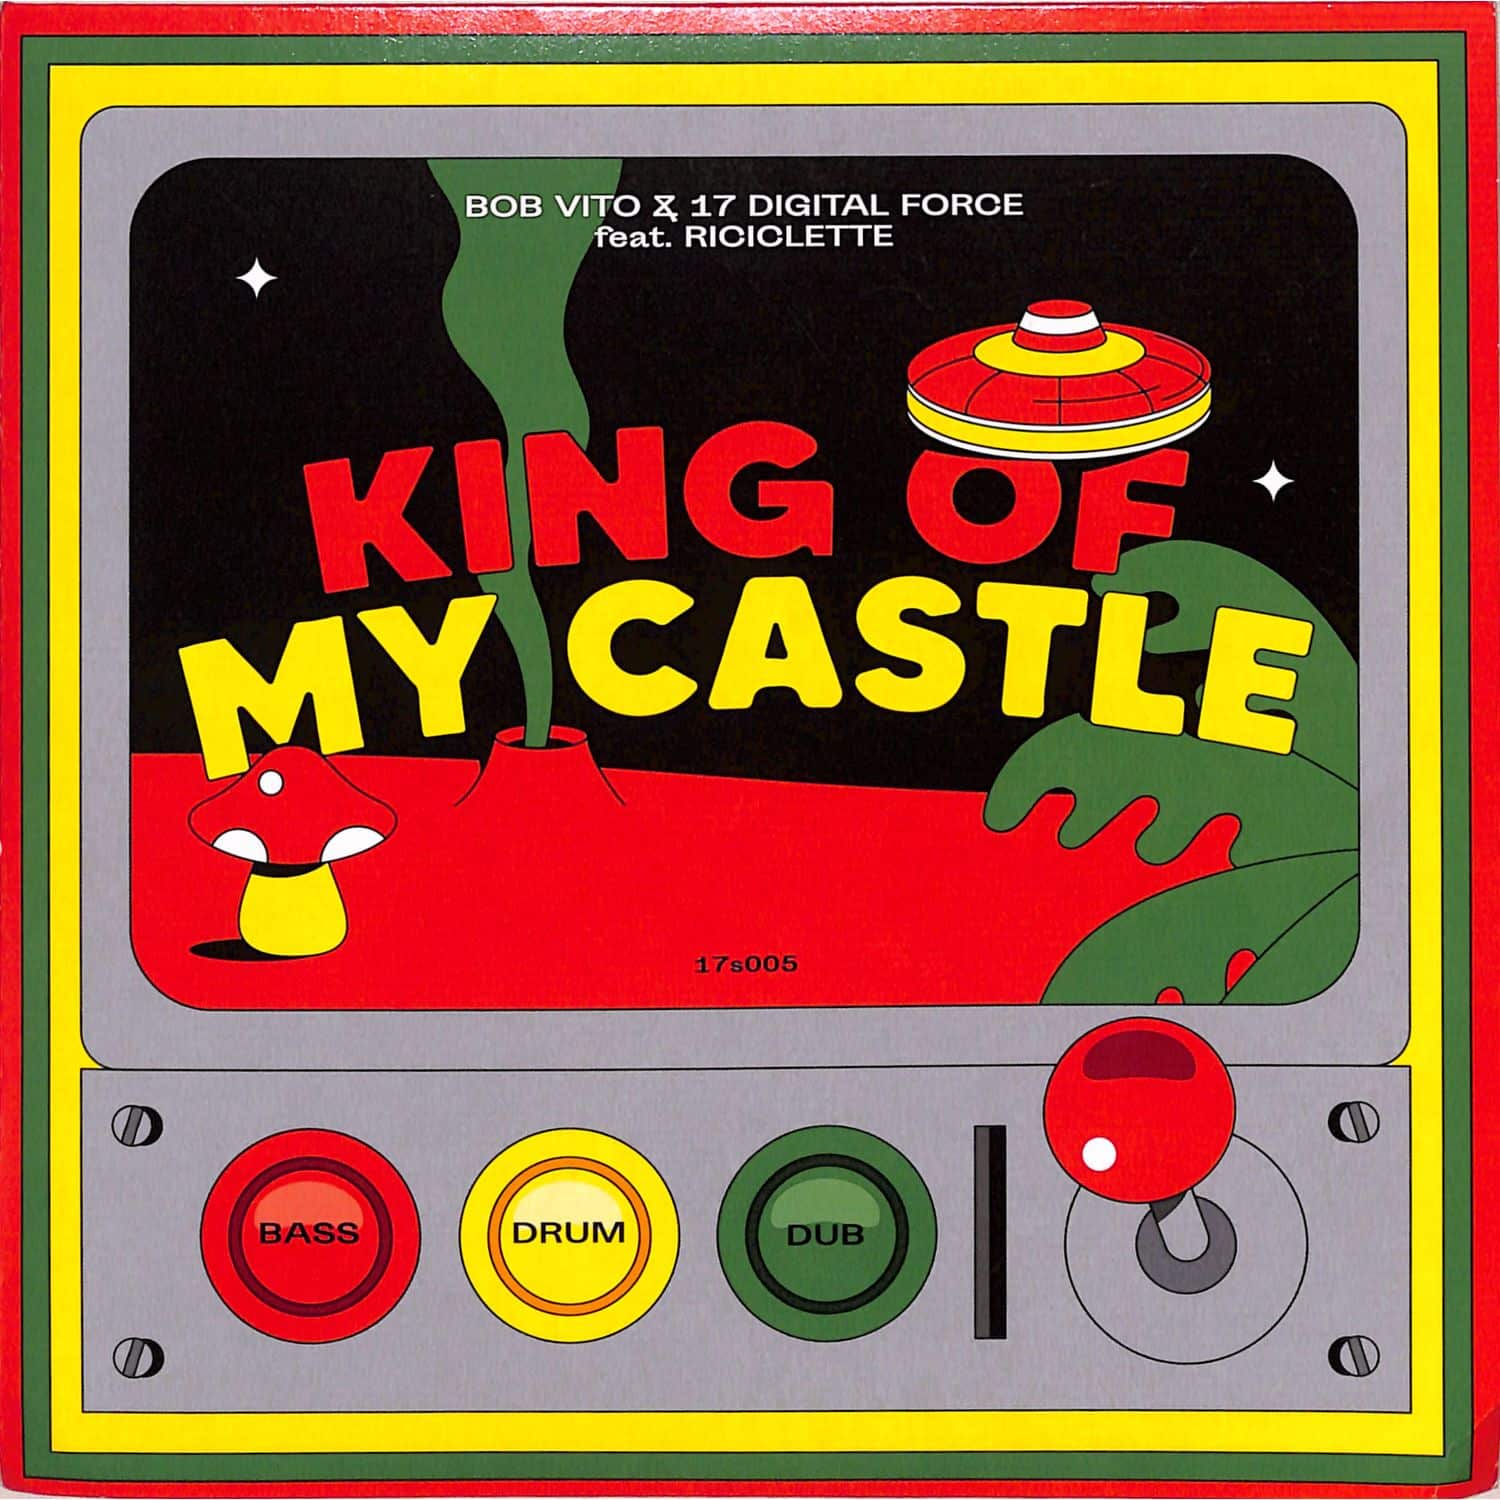 Bob Vito & 17 Digital Force ft. Riciclette - KING OF MY CASTLE 